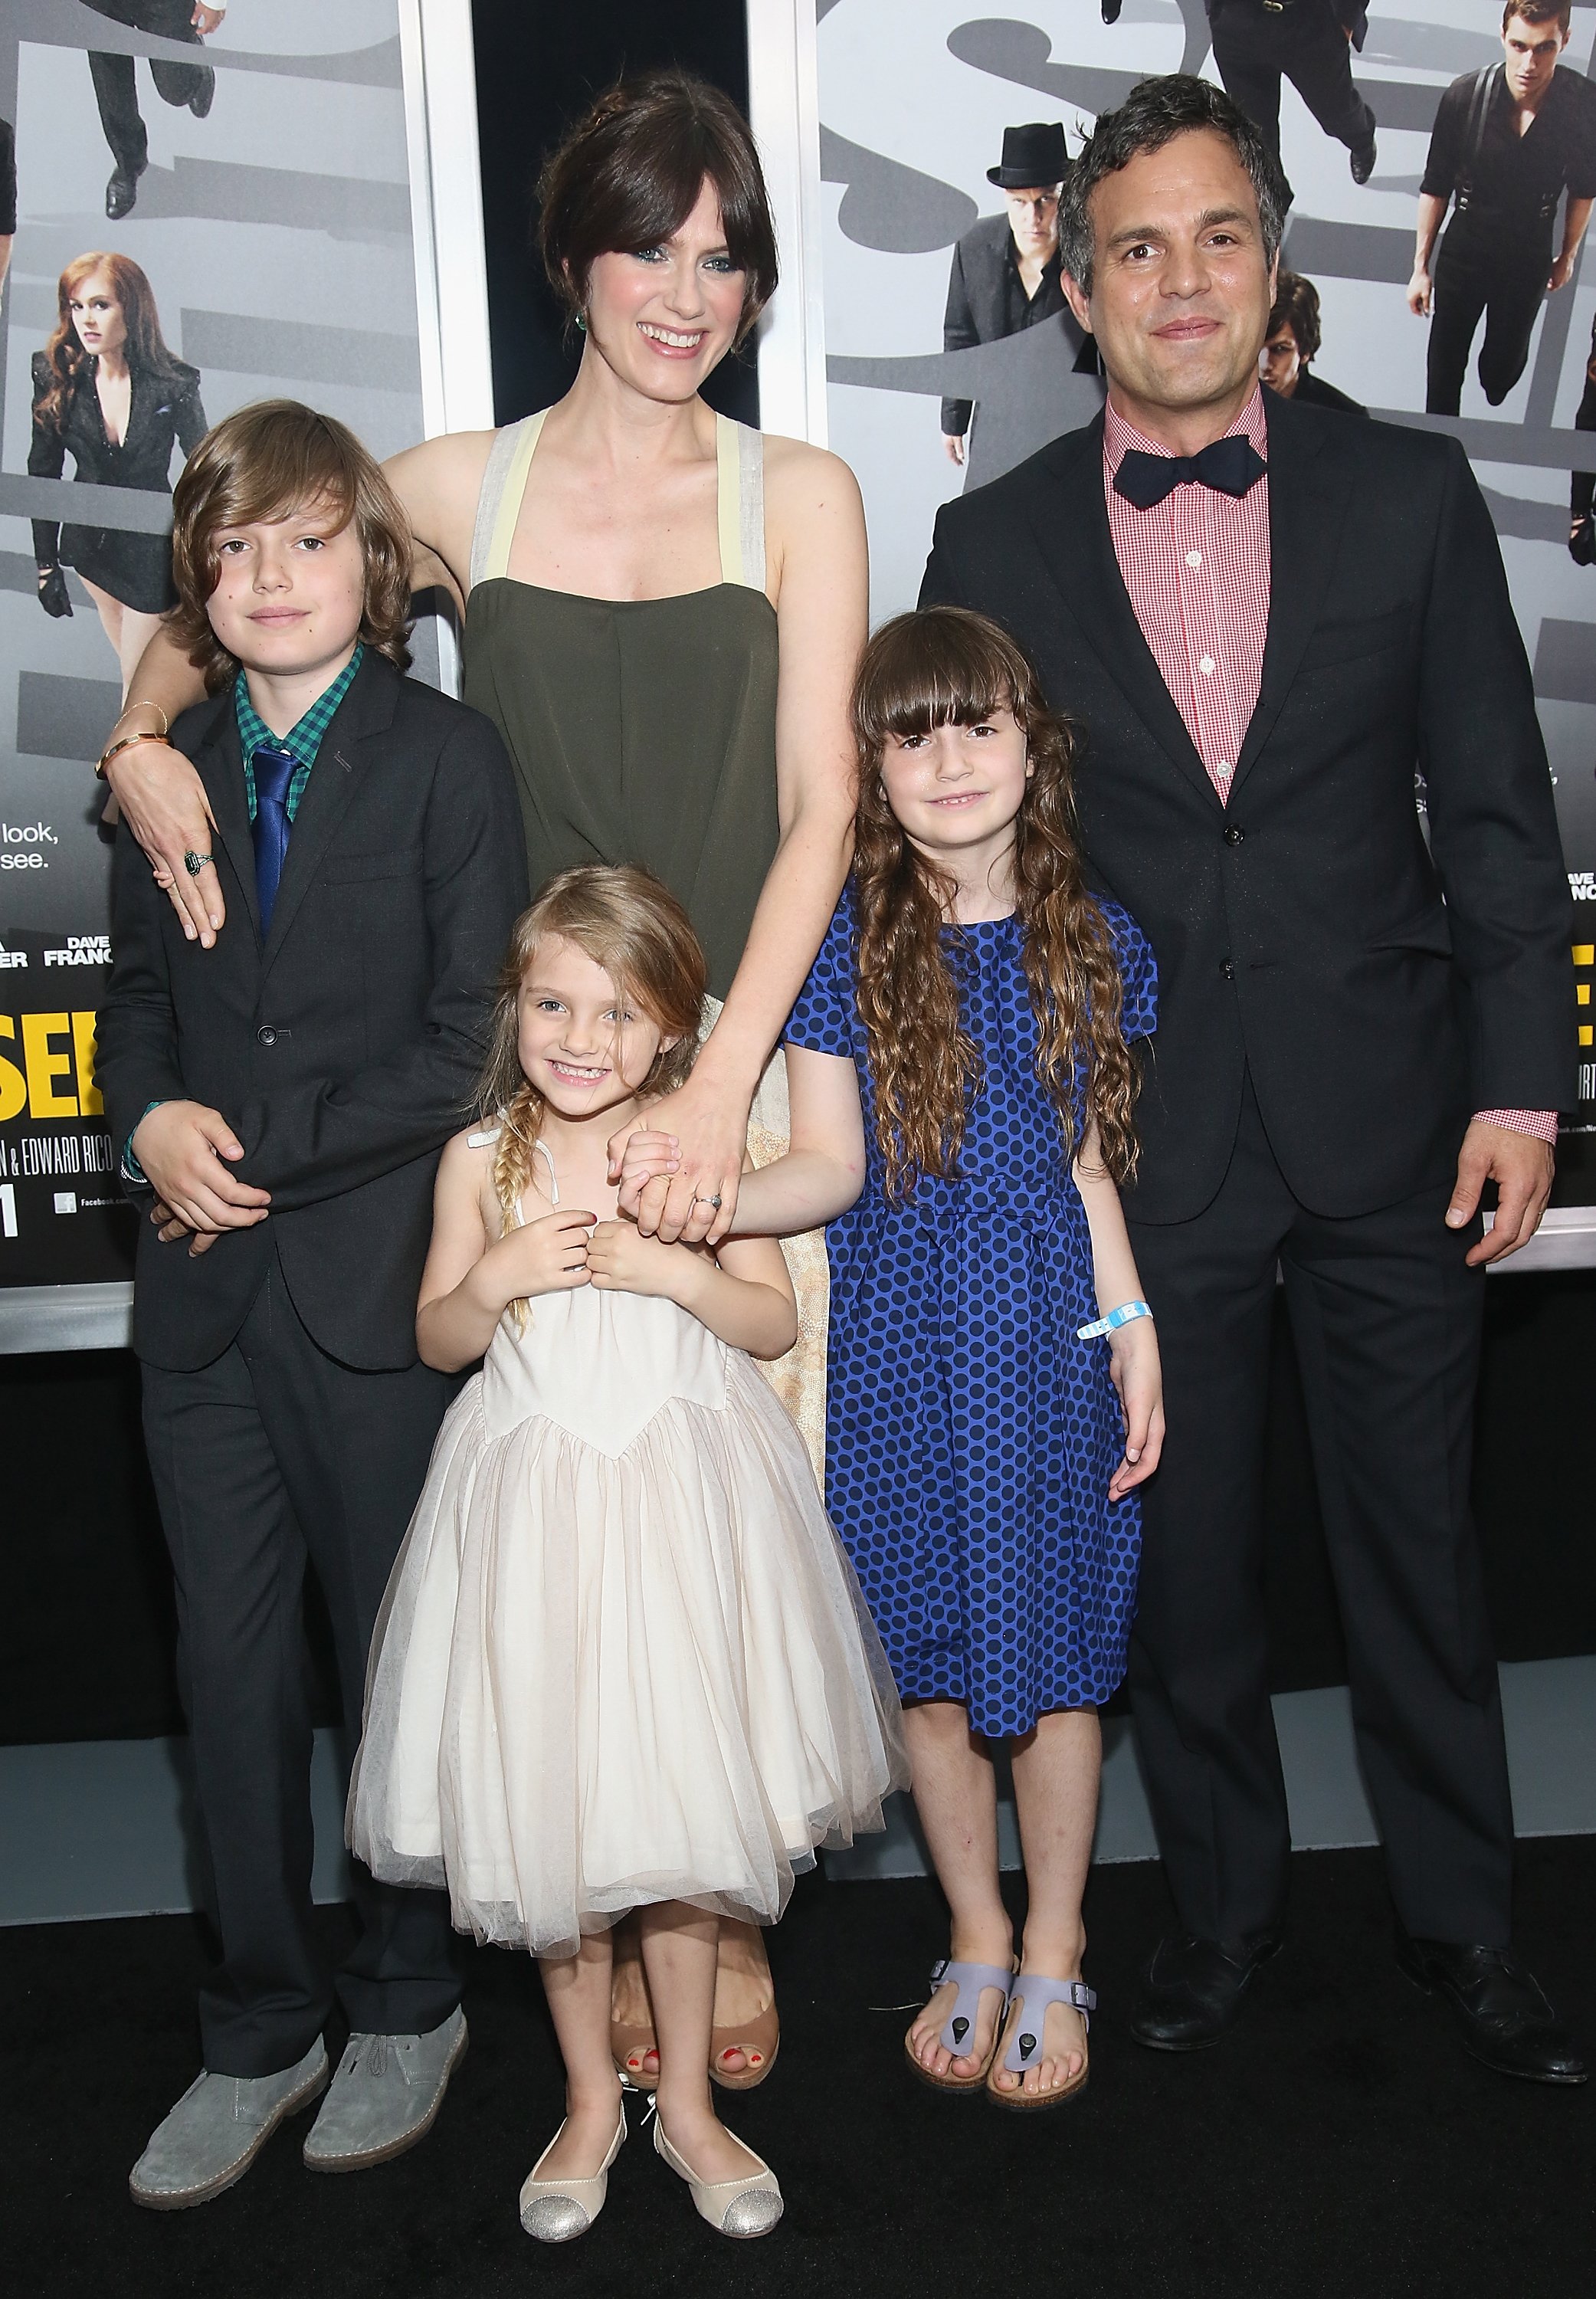 Actor Mark Ruffalo and Sunrise Coigney with family at the "Now You See Me" New York Premiere at AMC Lincoln Square Theater on May 21, 2013 in New York City. | Source: Getty Images